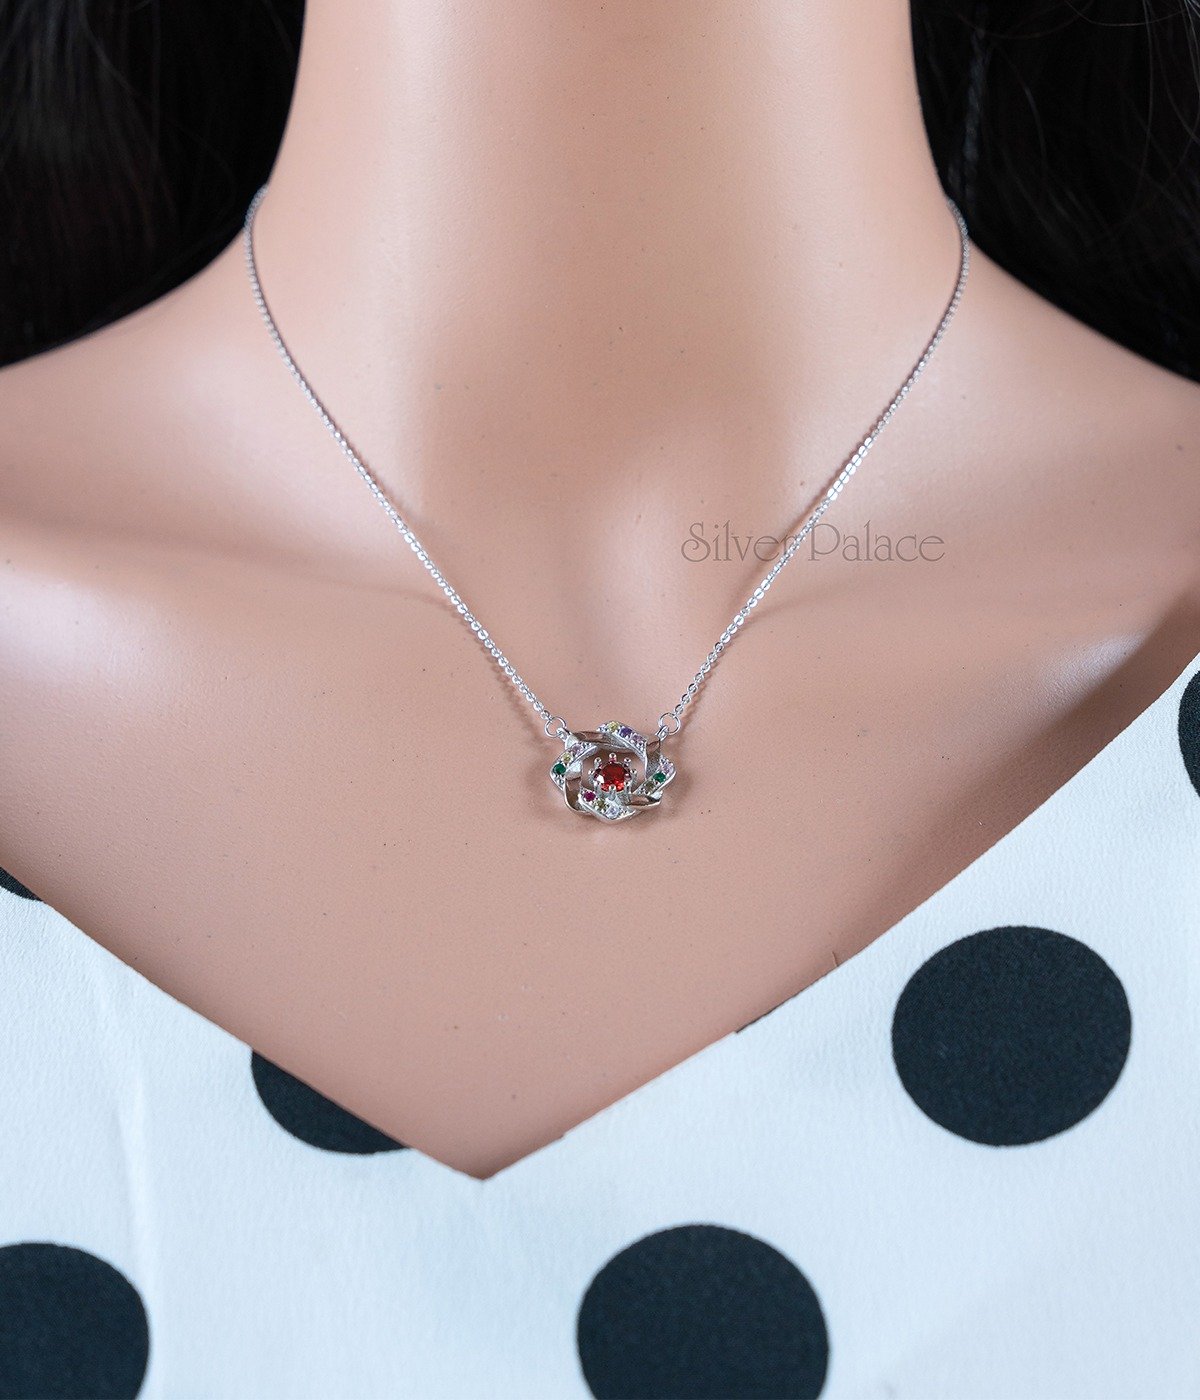 92.5 STERLING SILVER ROSE SHAPED STONE STUDDED PENDANT